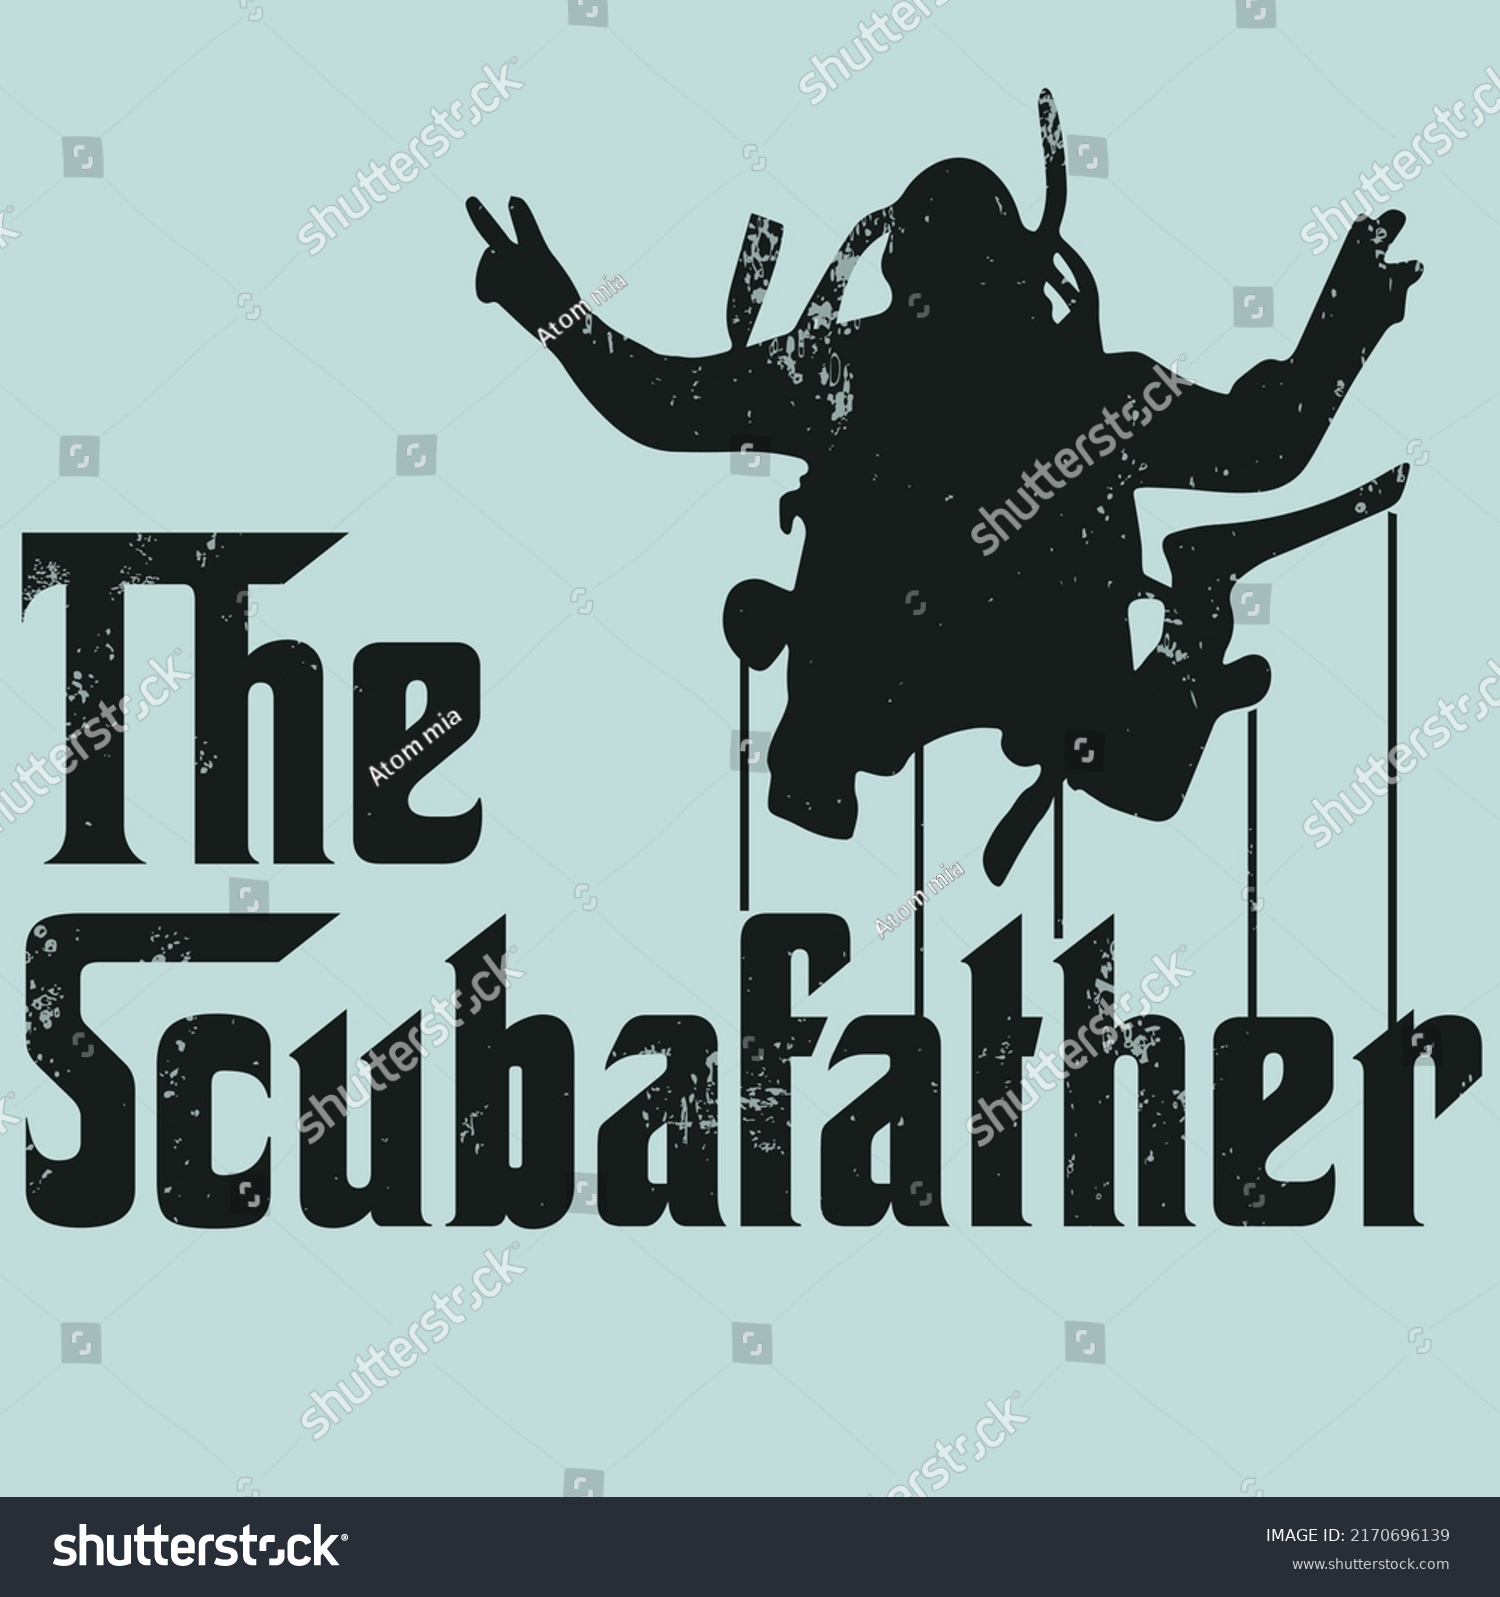 SVG of The scuba diver father design which themed on the god father, scuba diver  silhouette vector with text scuba father. Template for poster,  print for t-shirt ,pin,logo,badge, illustration,clip art, svg svg